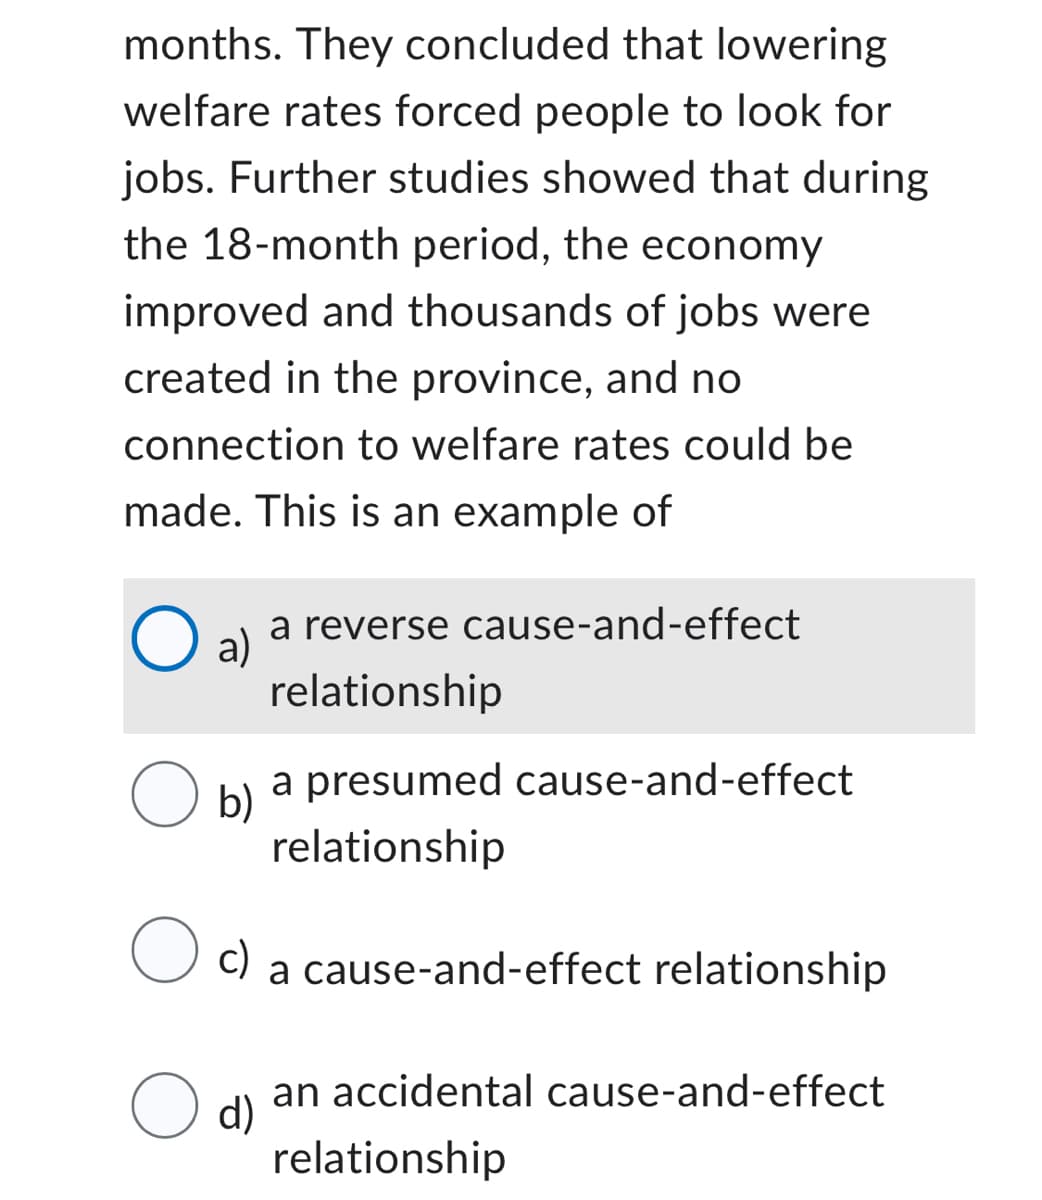 months. They concluded that lowering
welfare rates forced people to look for
jobs. Further studies showed that during
the 18-month period, the economy
improved and thousands of jobs were
created in the province, and no
connection to welfare rates could be
made. This is an example of
O a) a reverse cause-and-effect
relationship
O b)
a presumed cause-and-effect
relationship
Oc)
a cause-and-effect relationship
an accidental cause-and-effect
d)
relationship